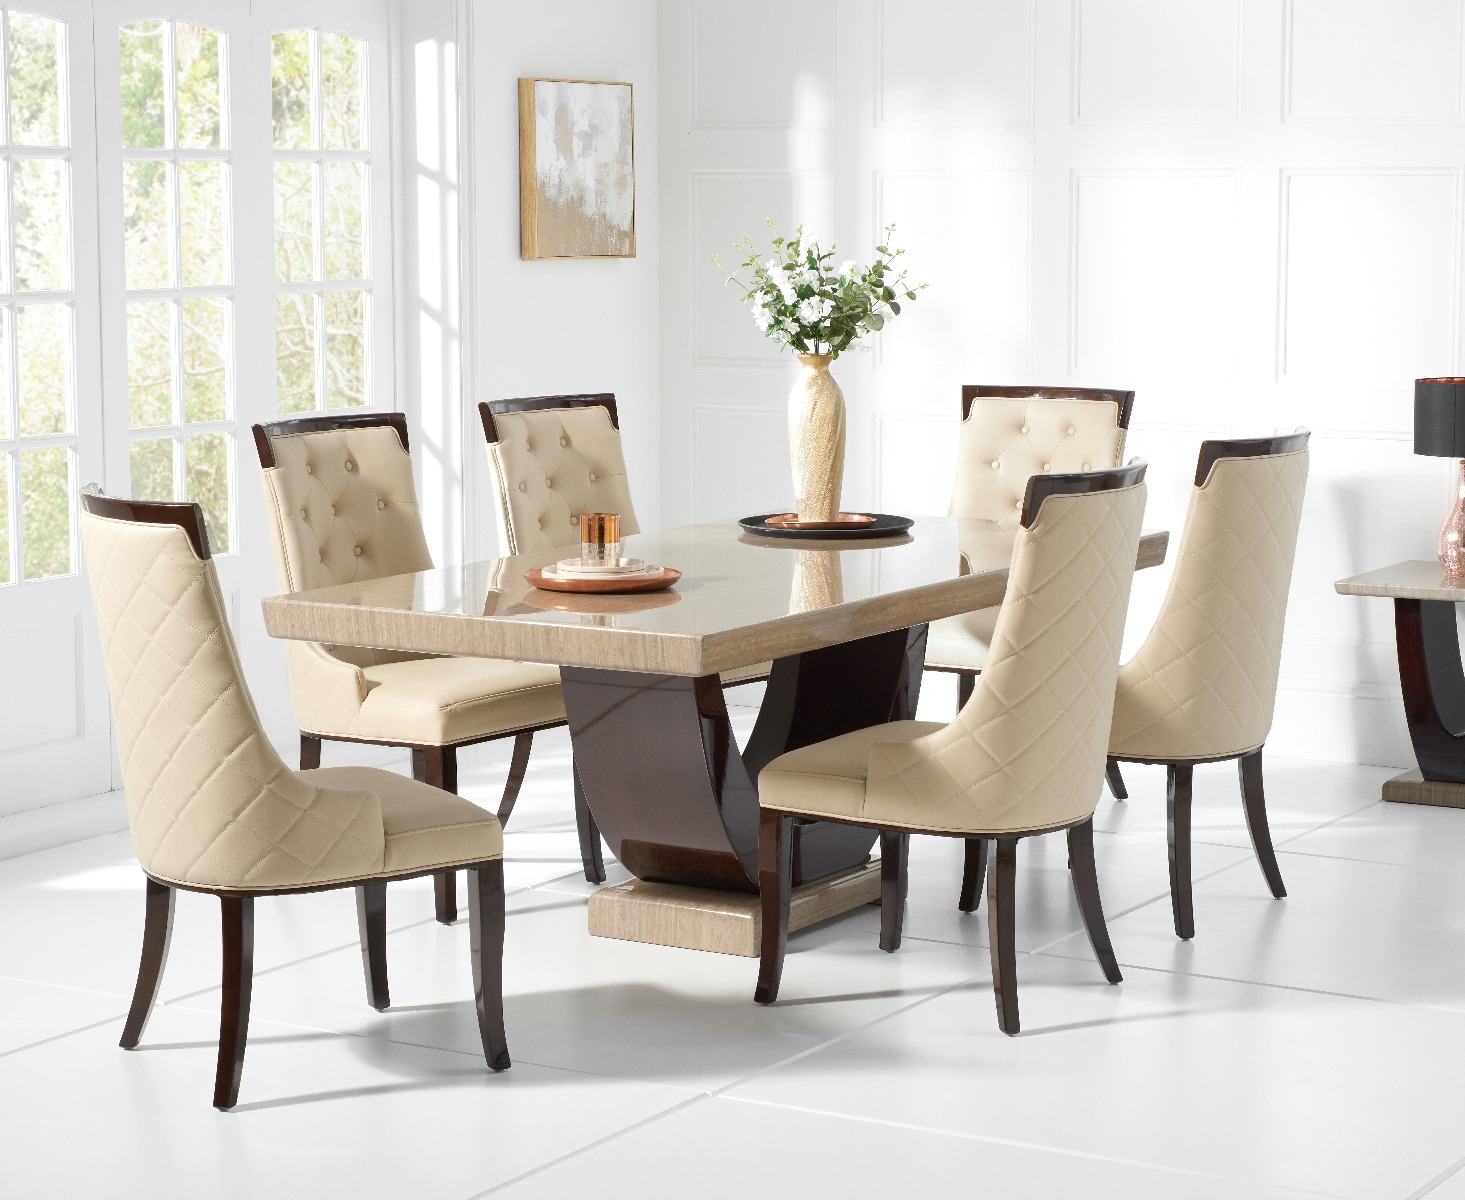 Novara 170cm Brown Pedestal Marble Dining Table With 4 Cream Francesca Chairs